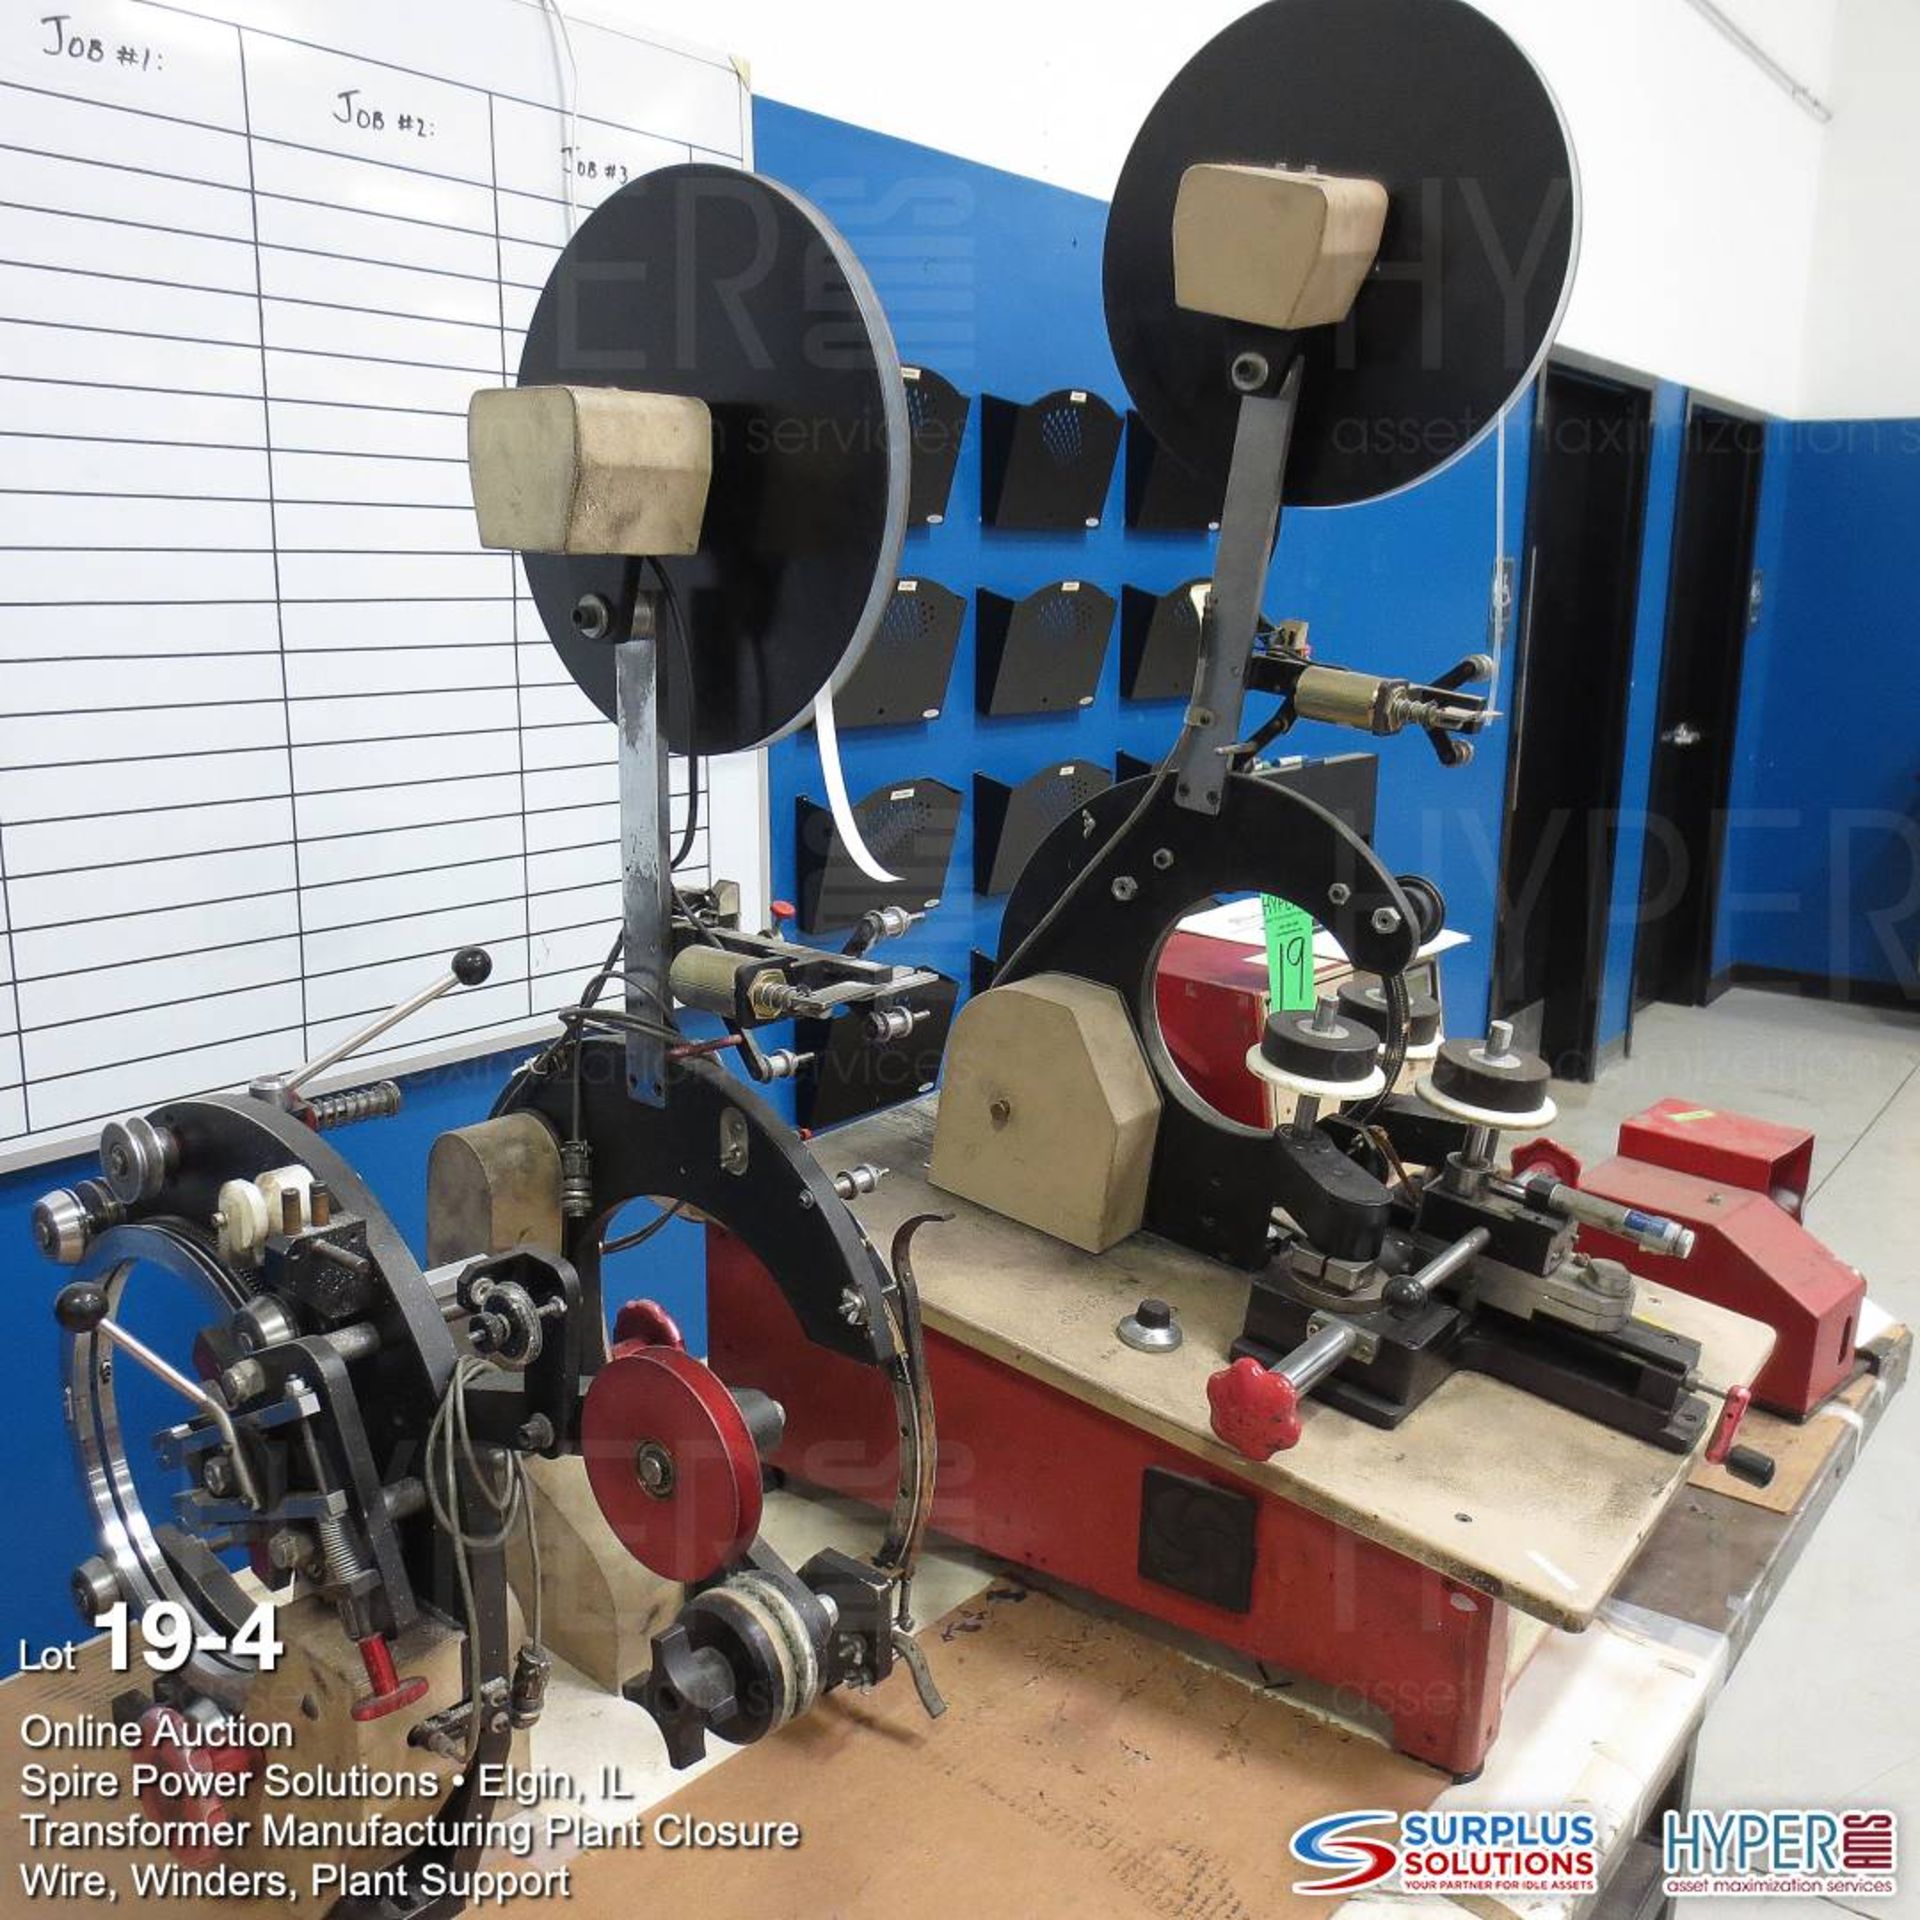 Jovil JV200 Toroidal winding machine with Jovil JV200SC standard control s/n 552 with 2 other size a - Image 4 of 4